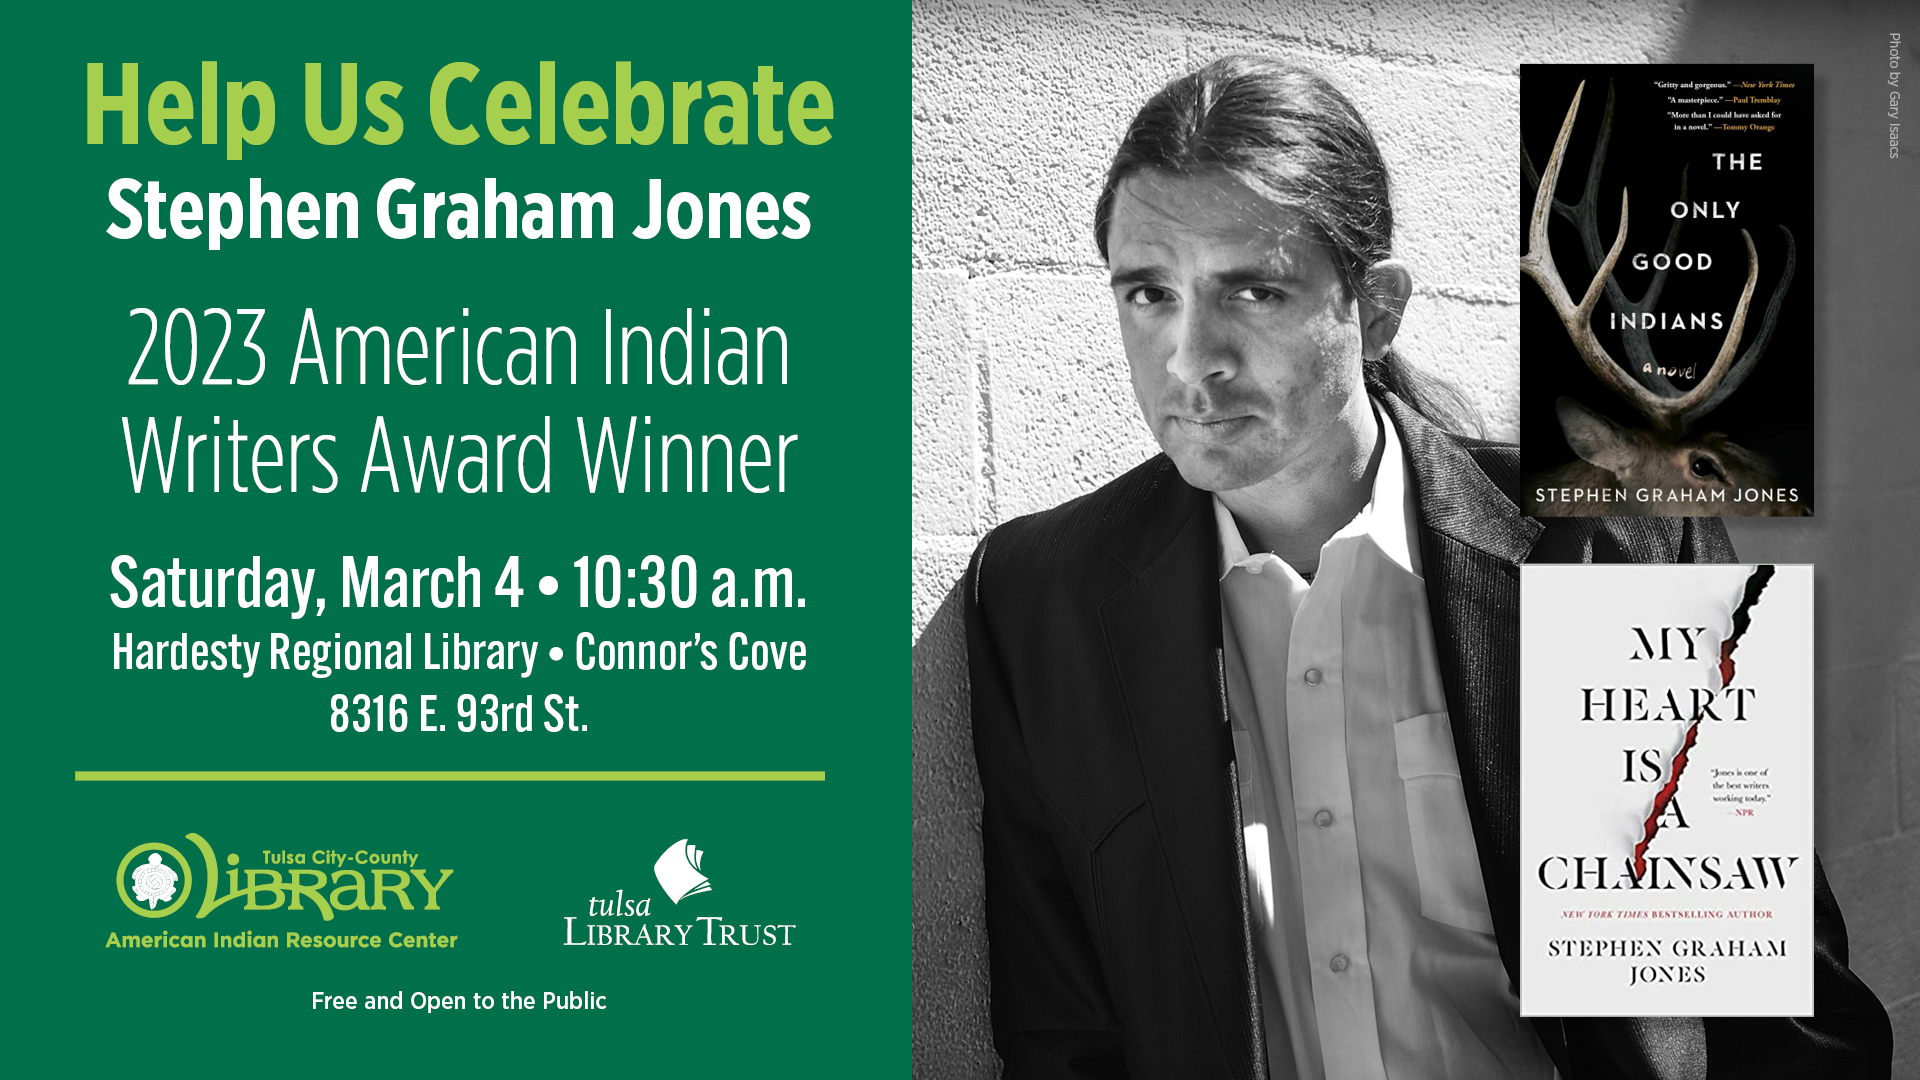 American Indian Resource Center | Tulsa Library